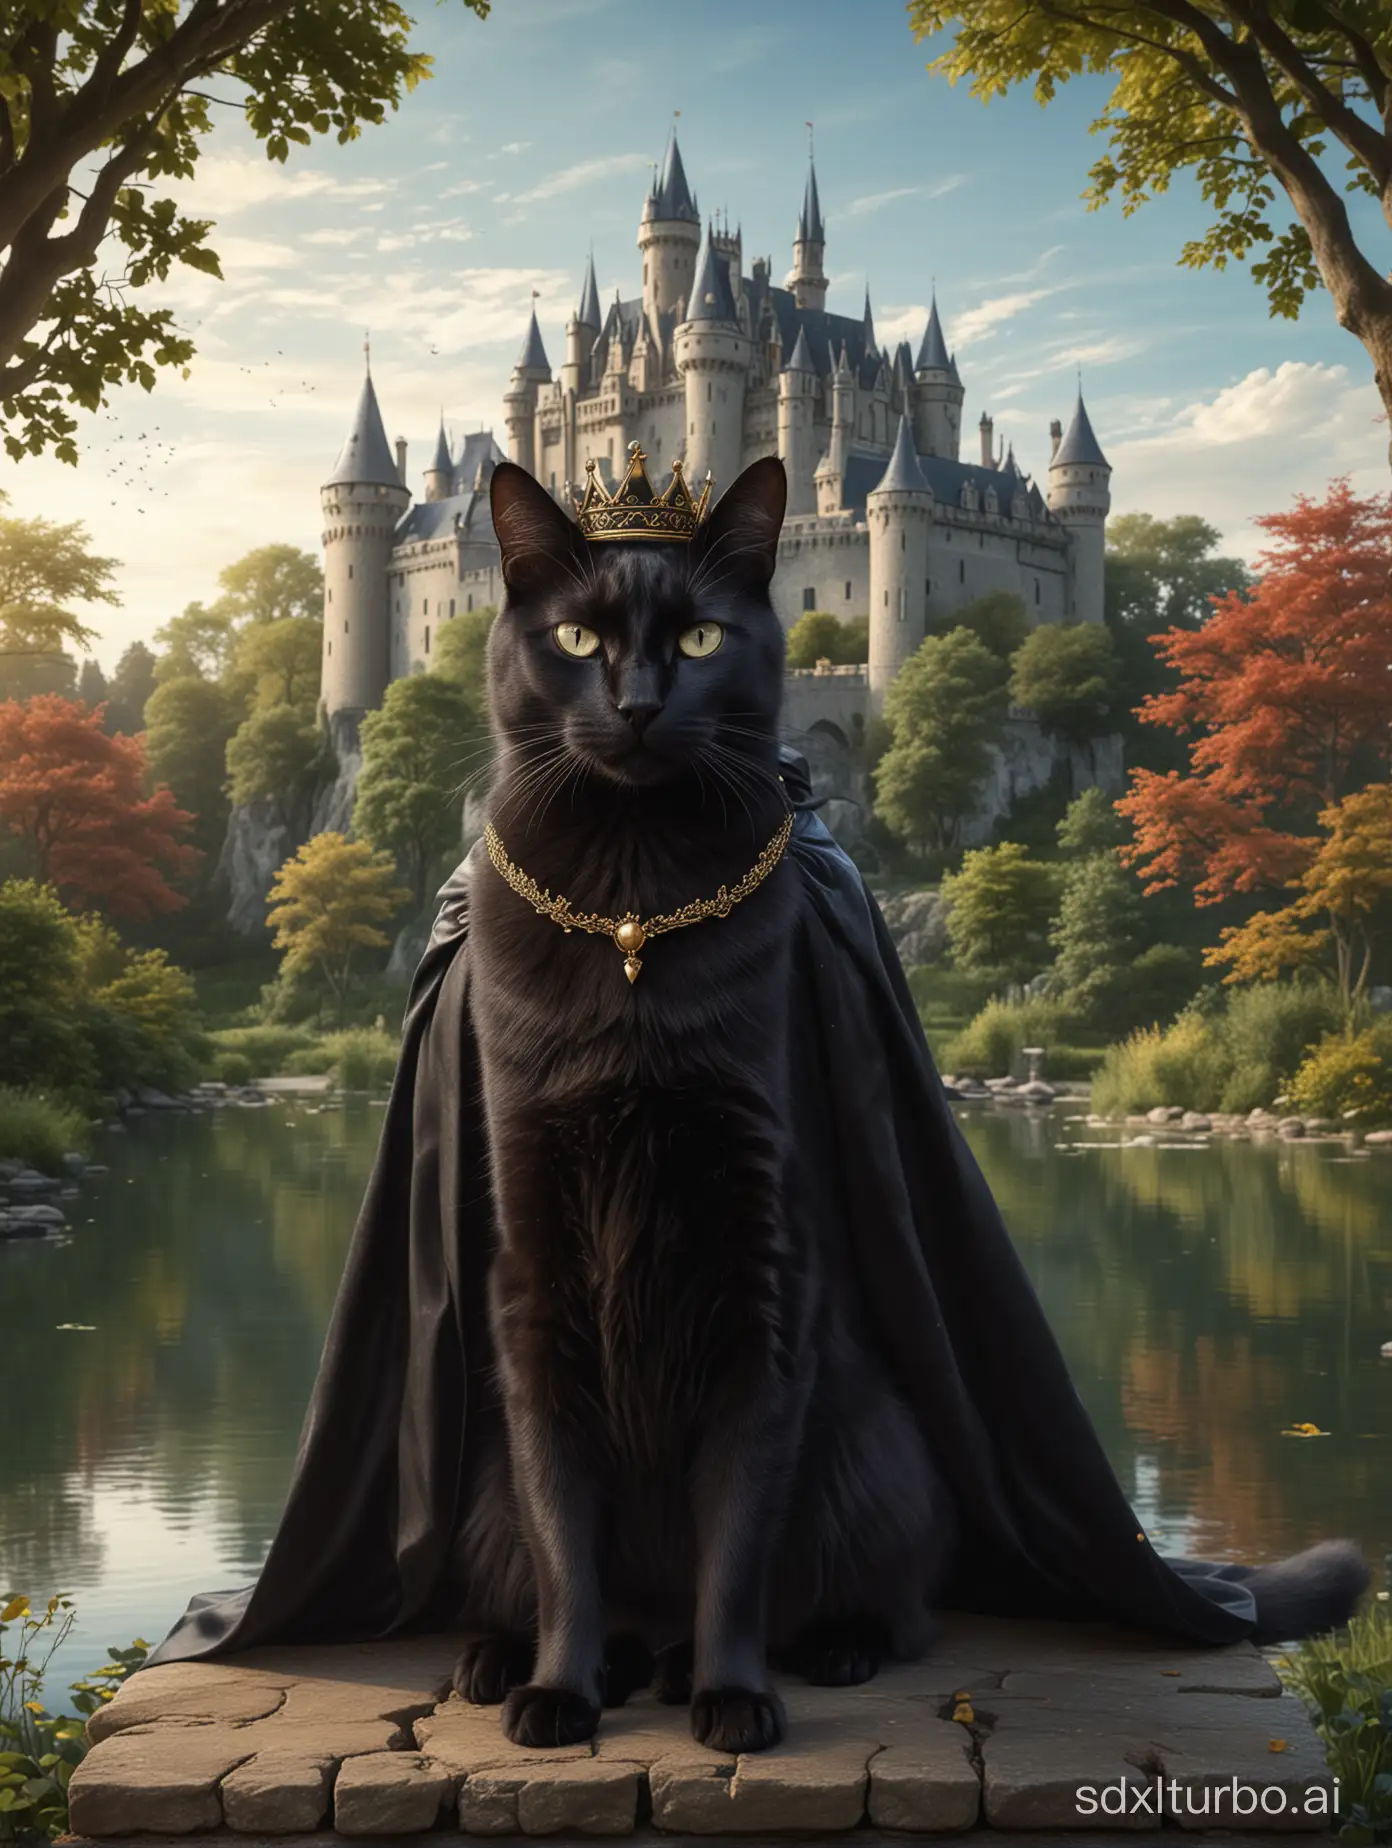 A black cat Queen with a crown and a cape, behind a castle with trees and a lake